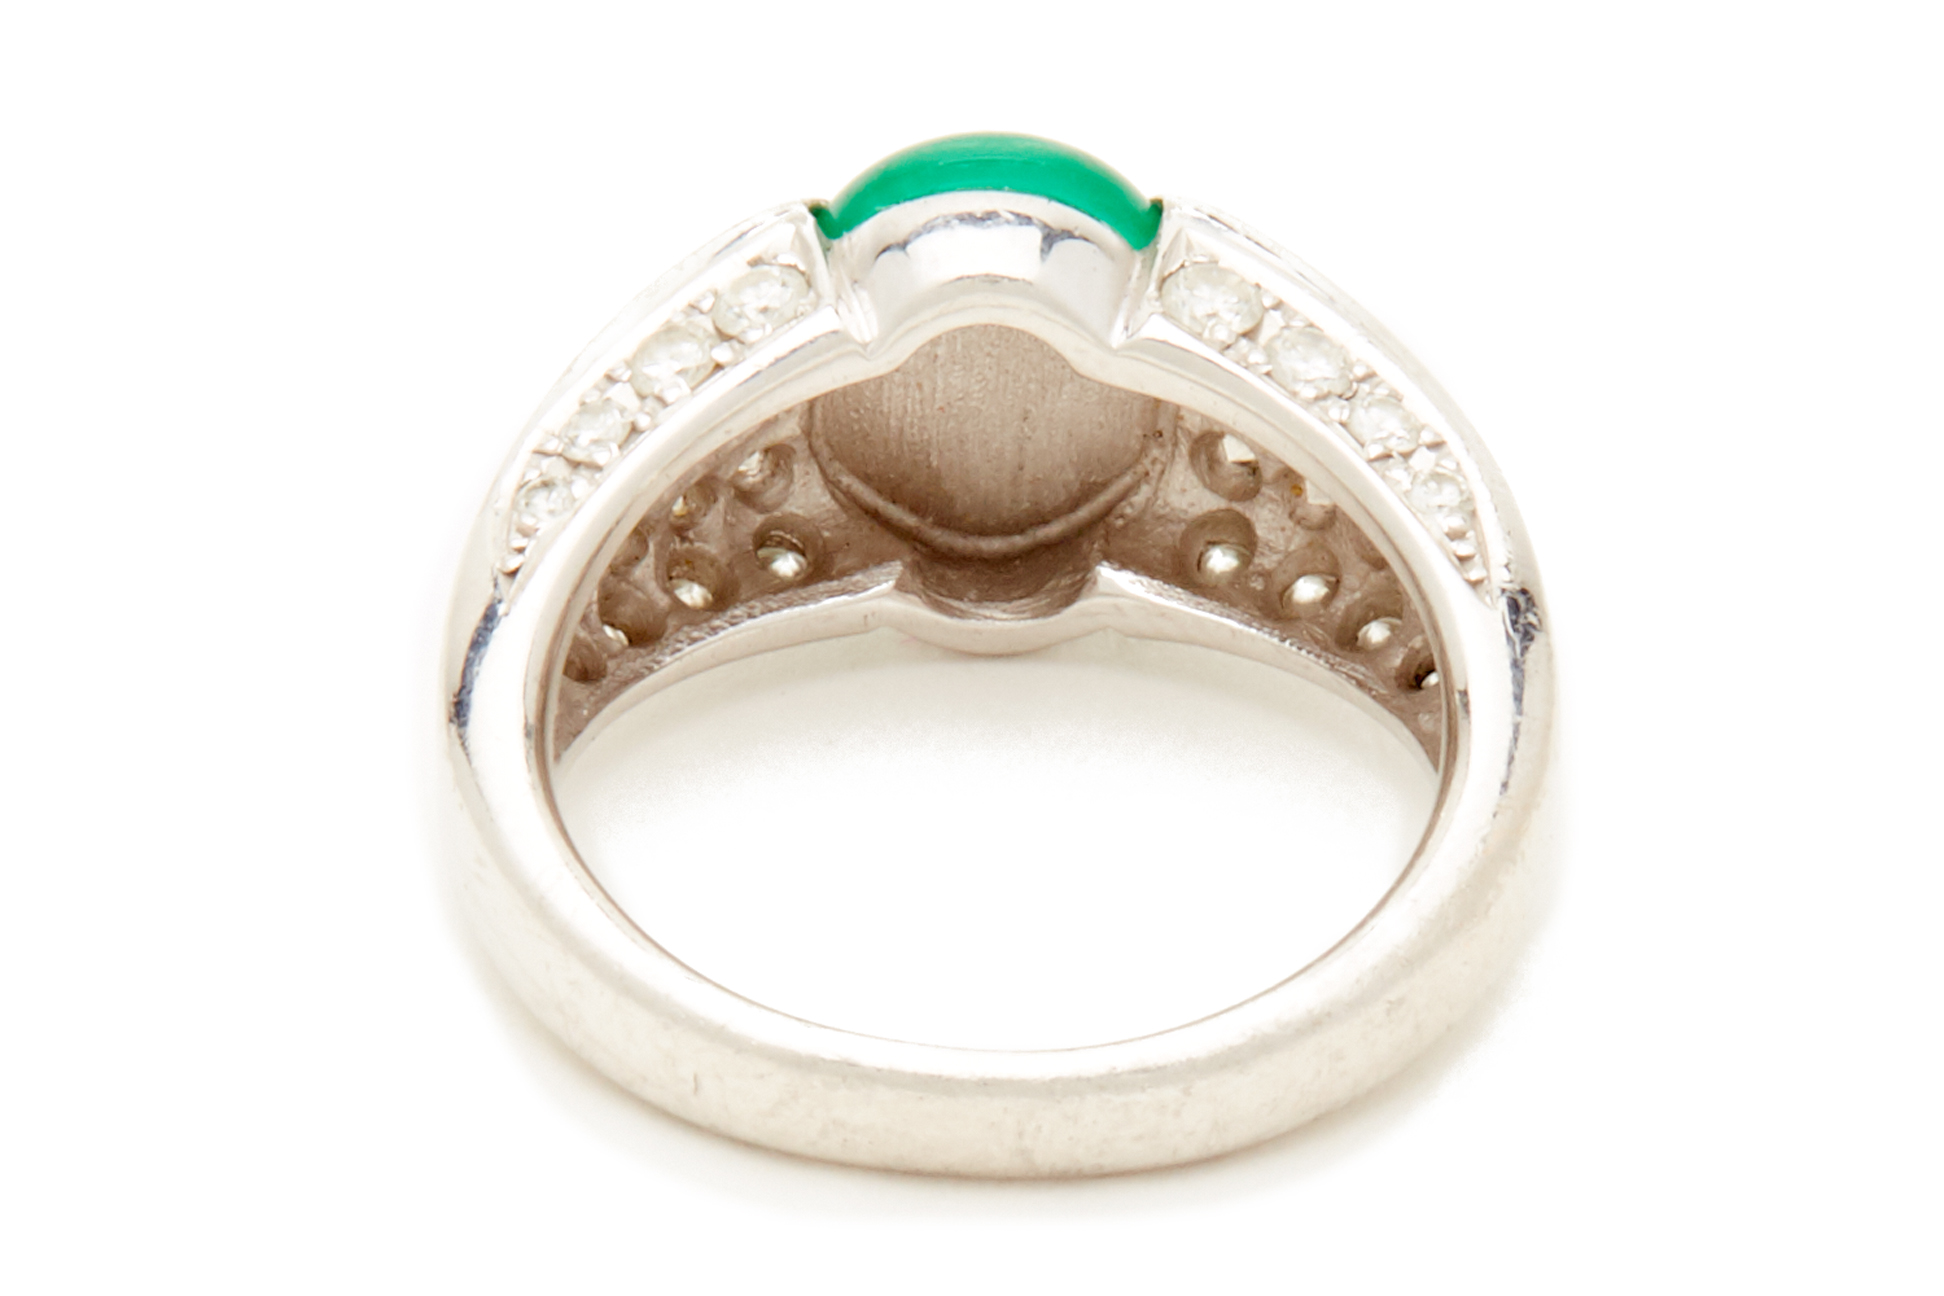 A PLATINUM, CABOCHON EMERALD AND DIAMOND RING - Image 4 of 5